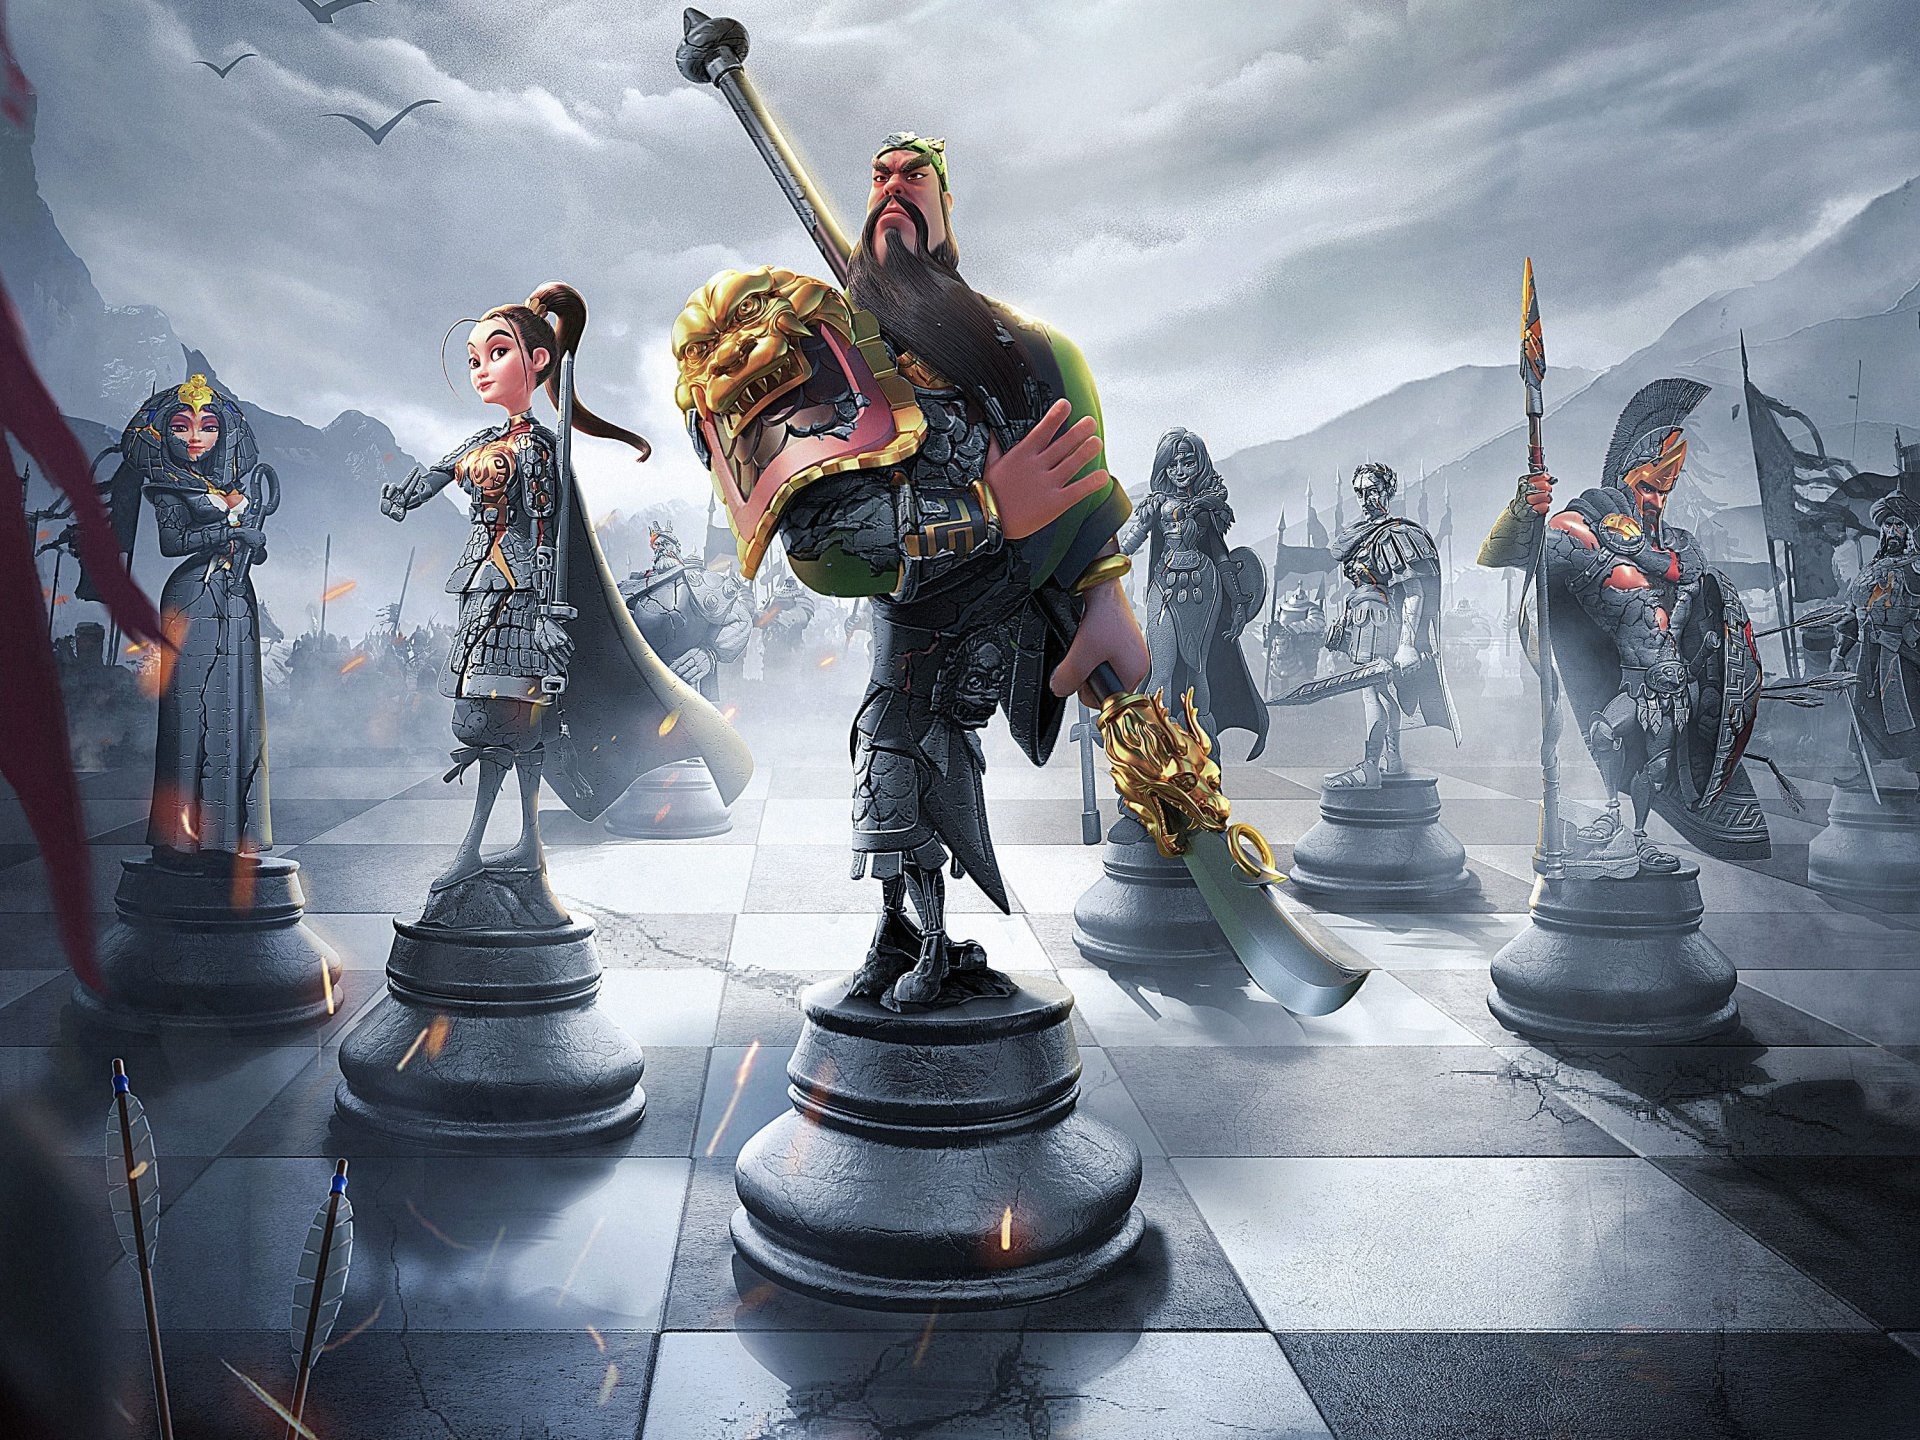 Online Board Game (Gaming), Rise of kingdoms wallpapers, Strategy game, Online gaming, 1920x1440 HD Desktop